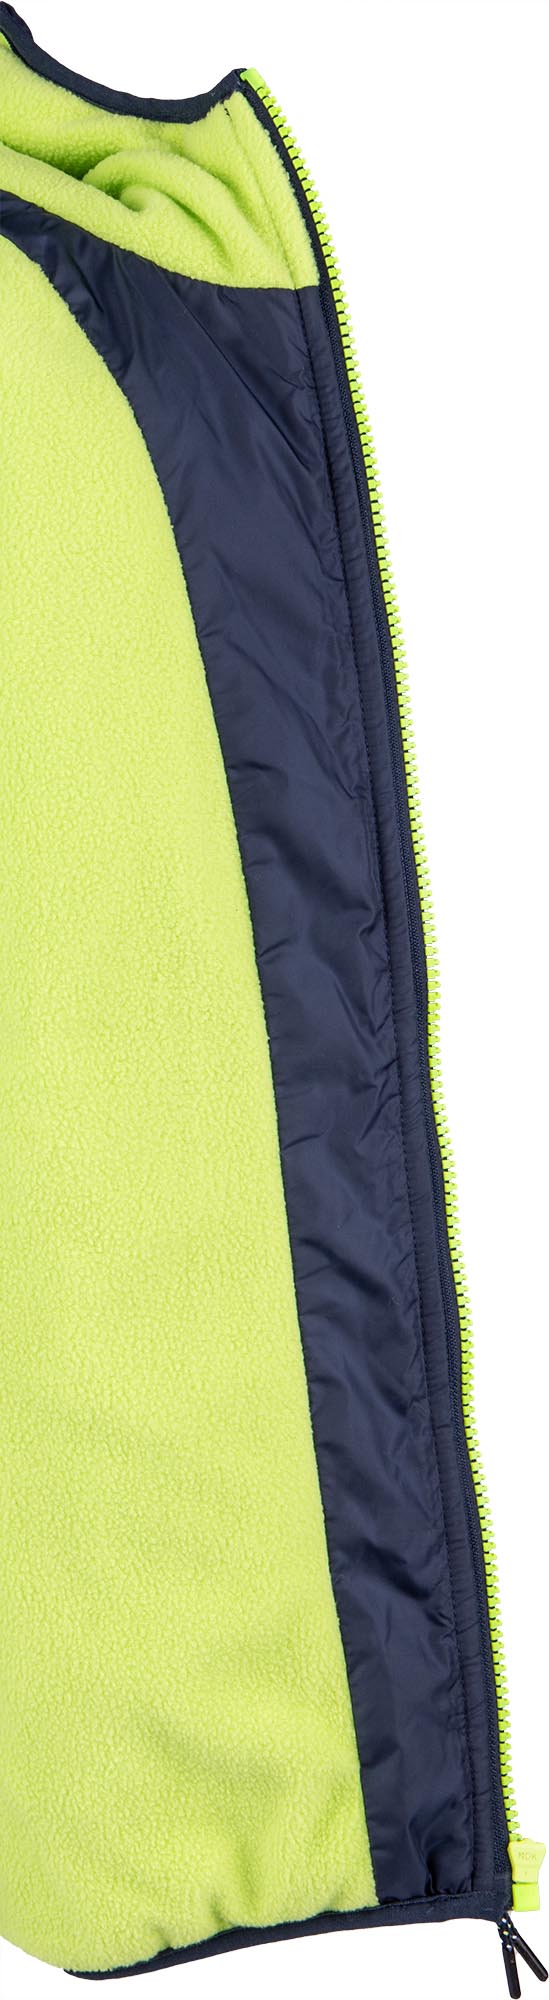 Boys’ quilted jacket